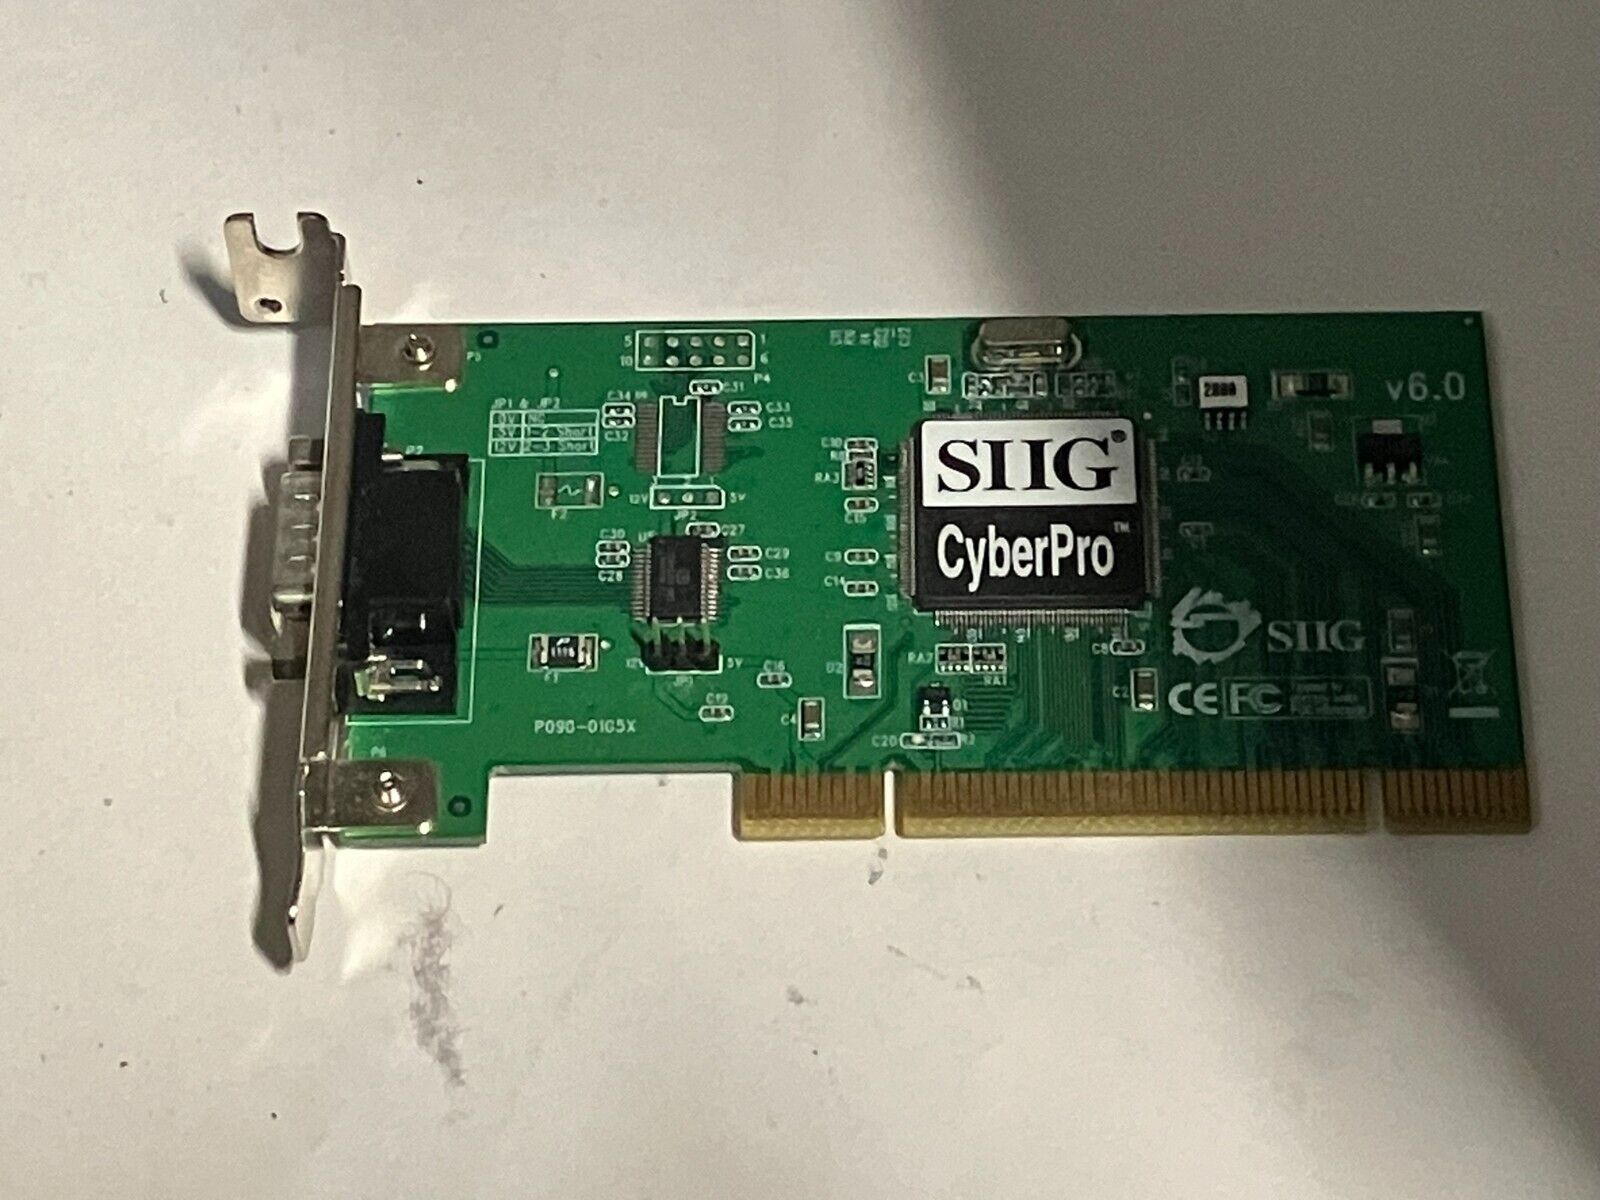 SIIG LP-P10011-S6 PCI Low Profile Single Serial Port Internal Controller Card